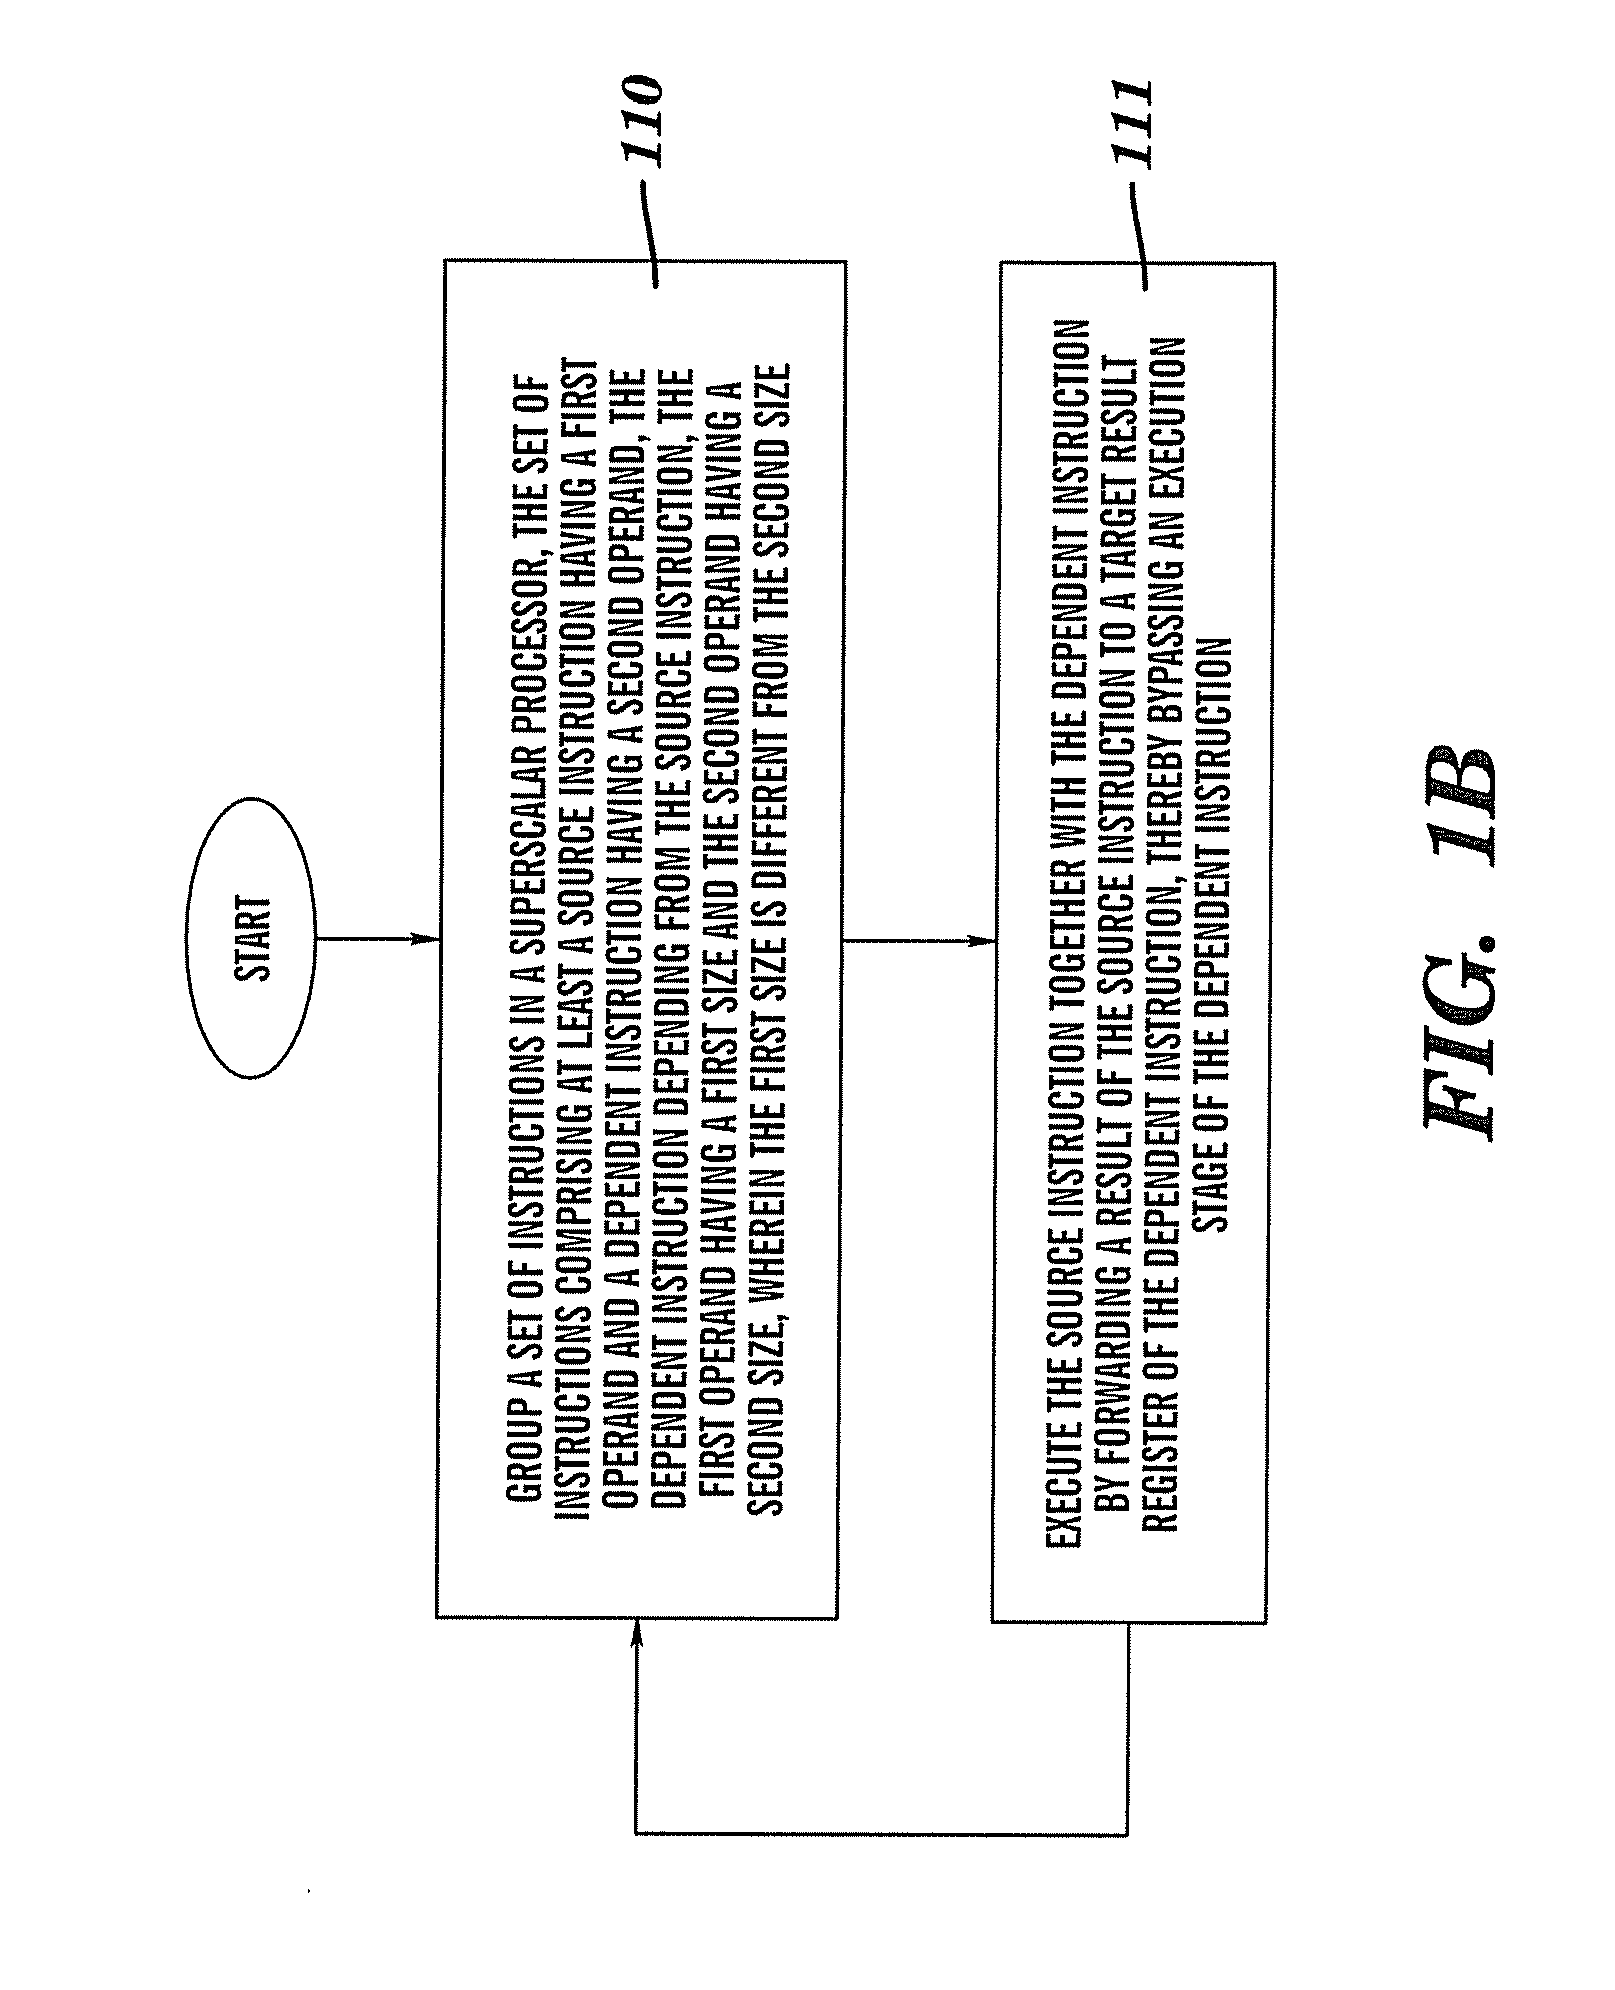 Method, system, computer program product, and hardware product for implementing result forwarding between differently sized operands in a superscalar processor